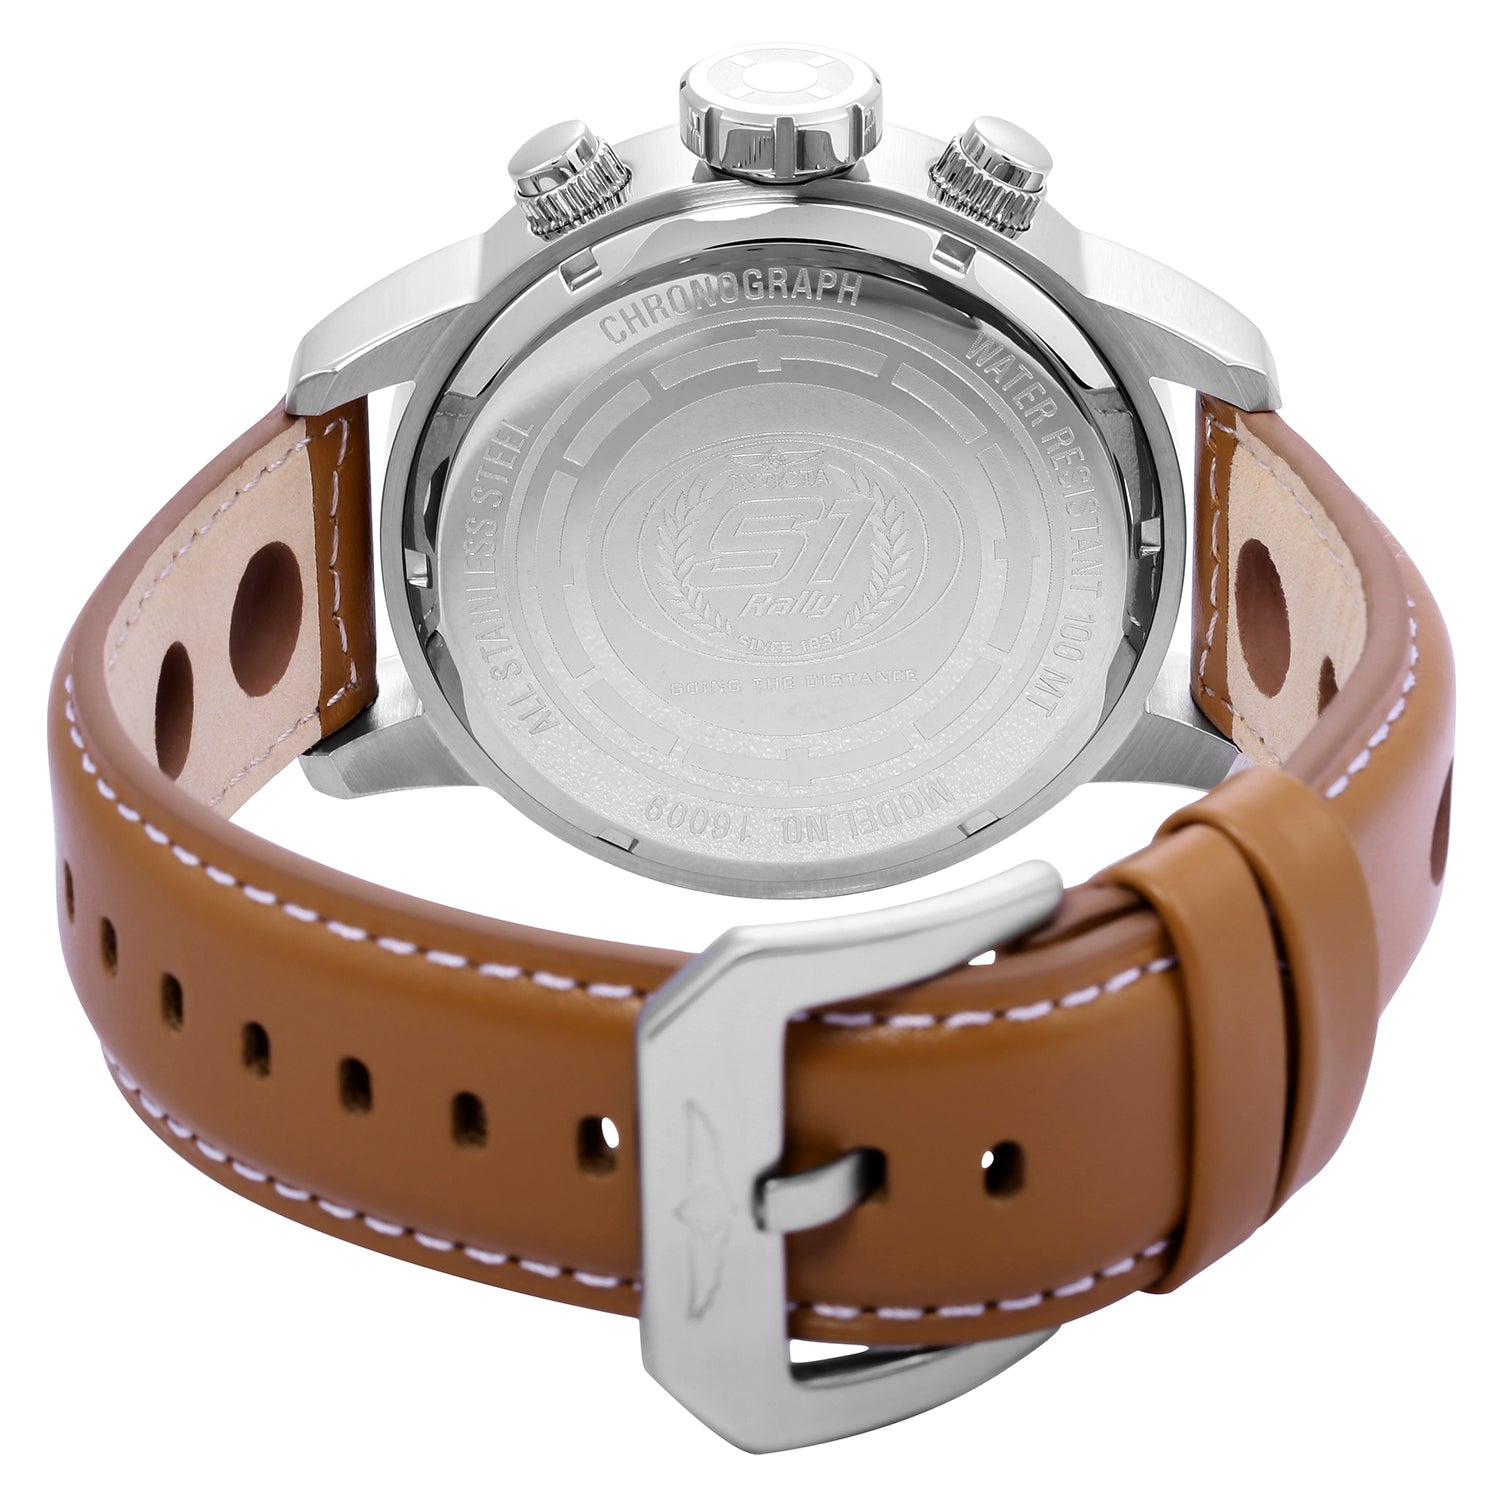 Back view of Invicta S1 Rally 16009 men's watch with brown leather strap